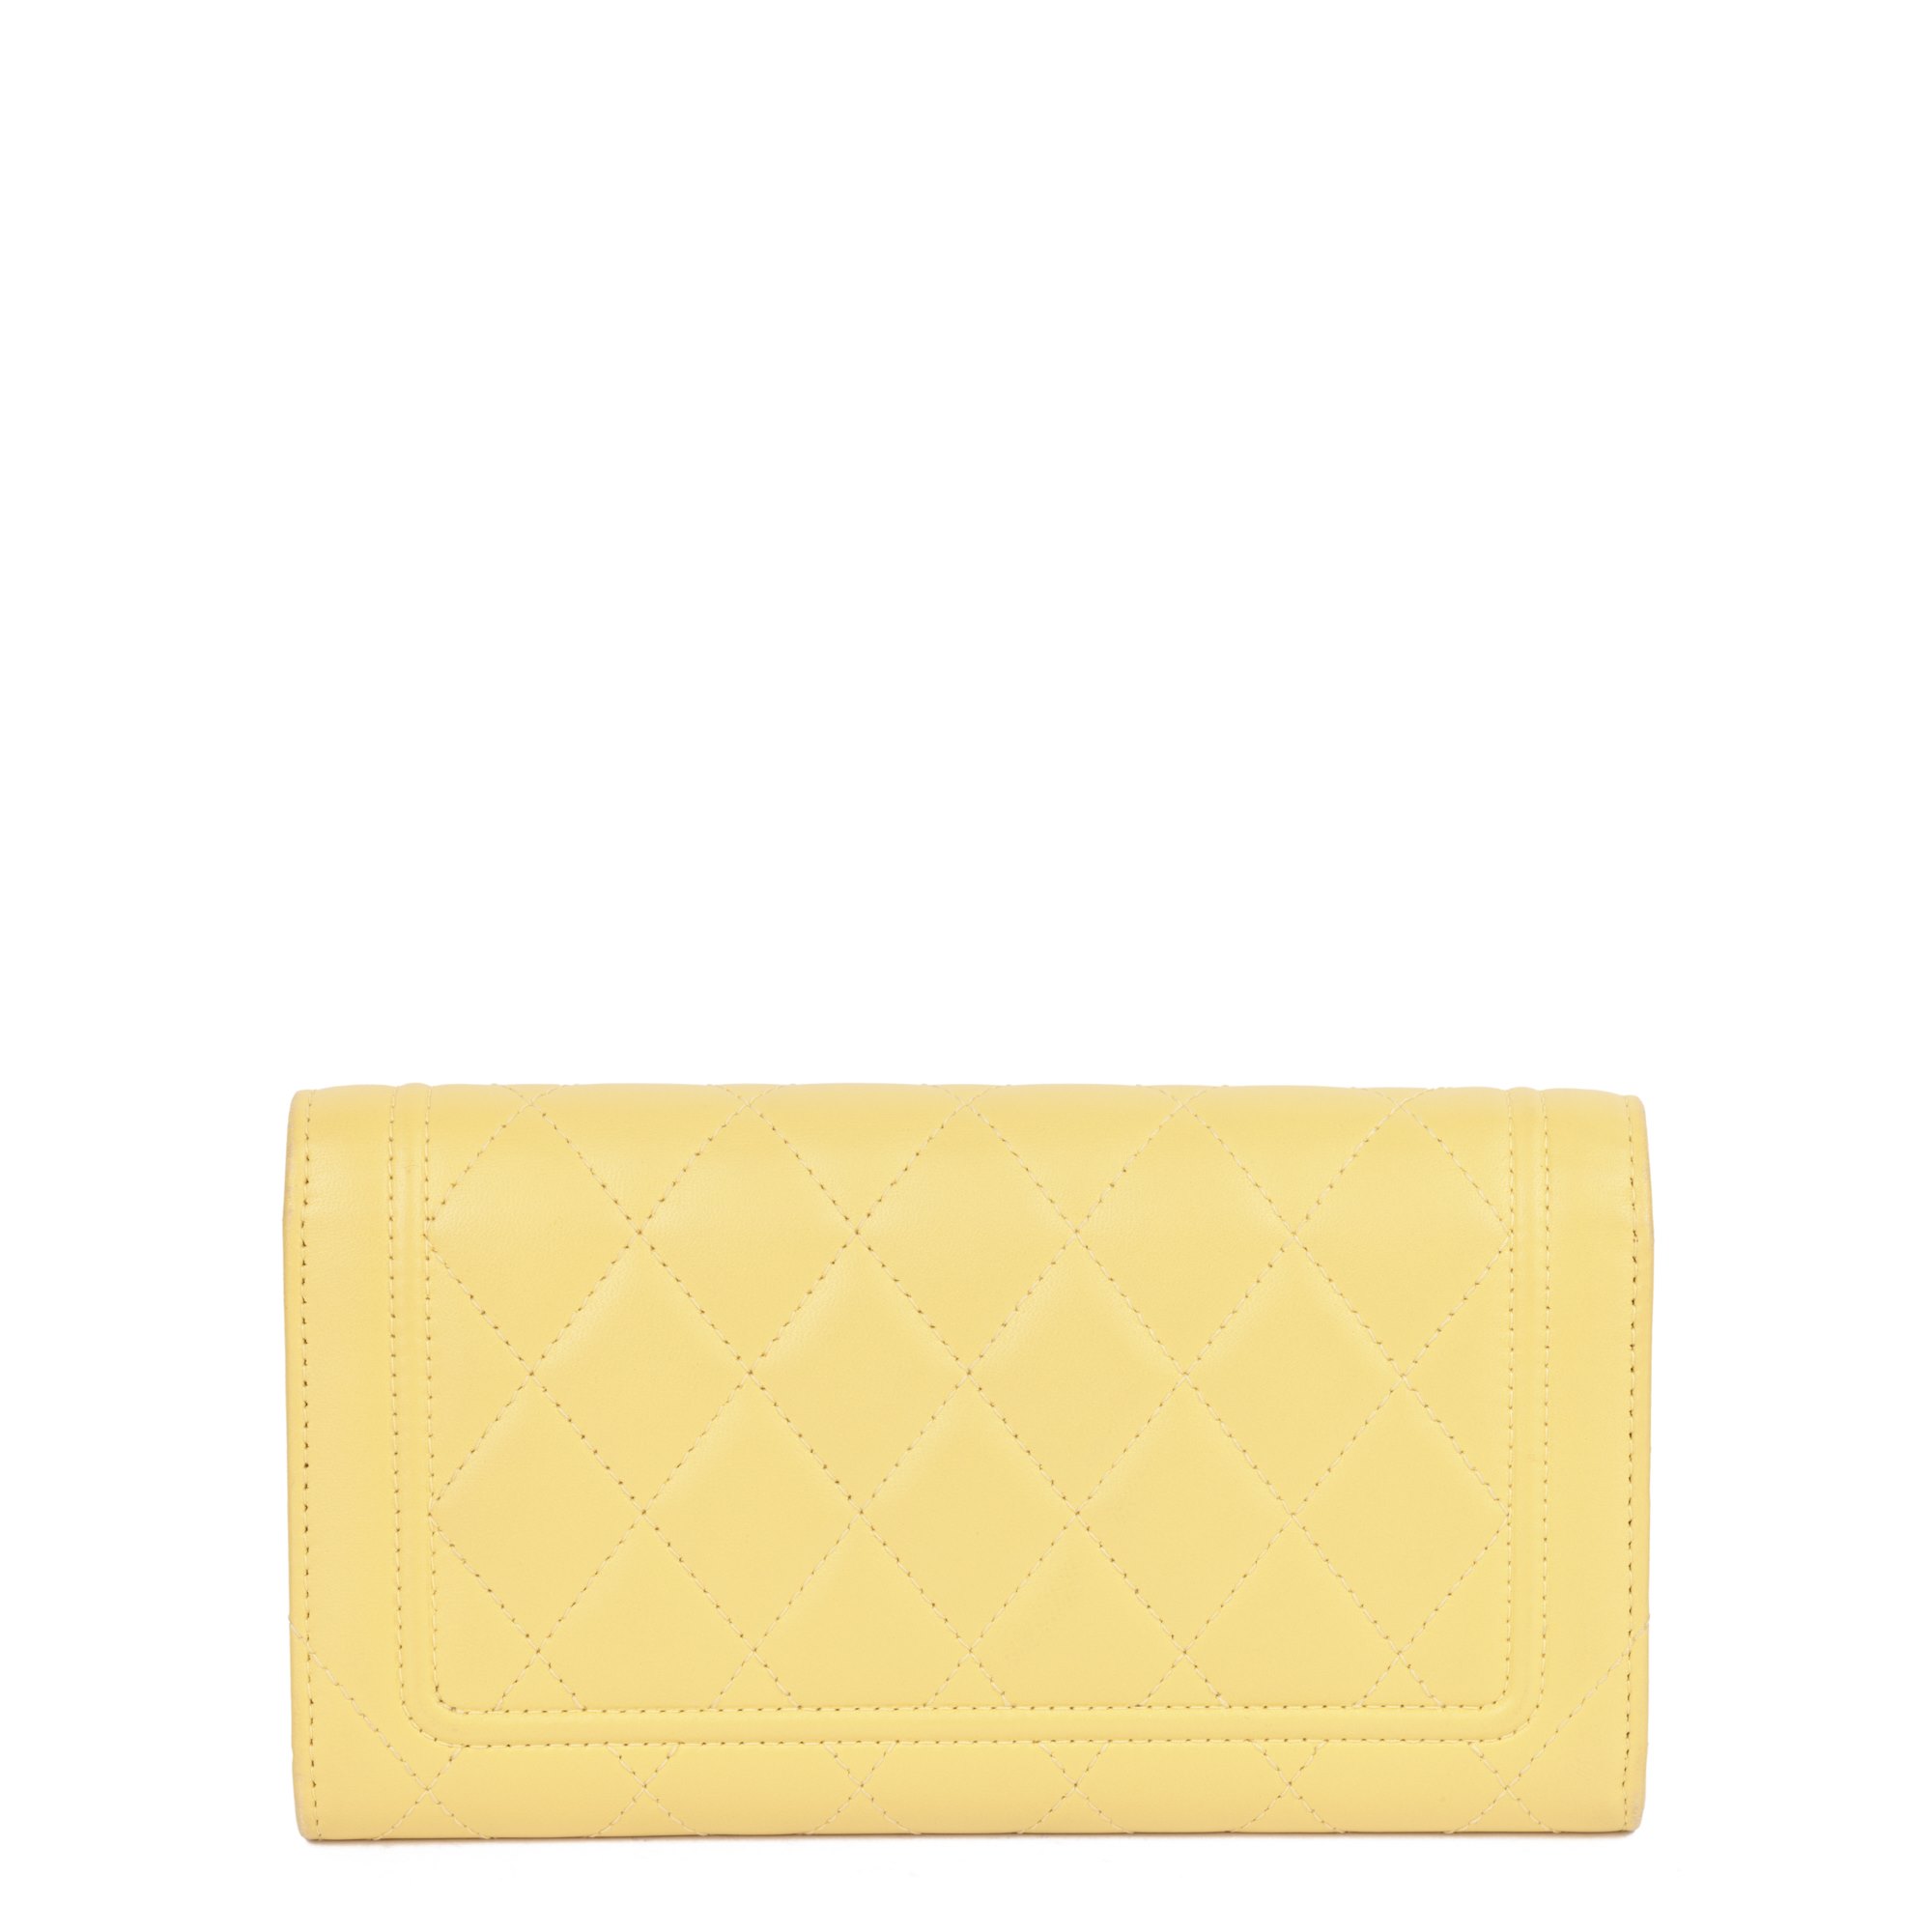 Chanel Yellow Quilted Lambskin Leather Long Wallet